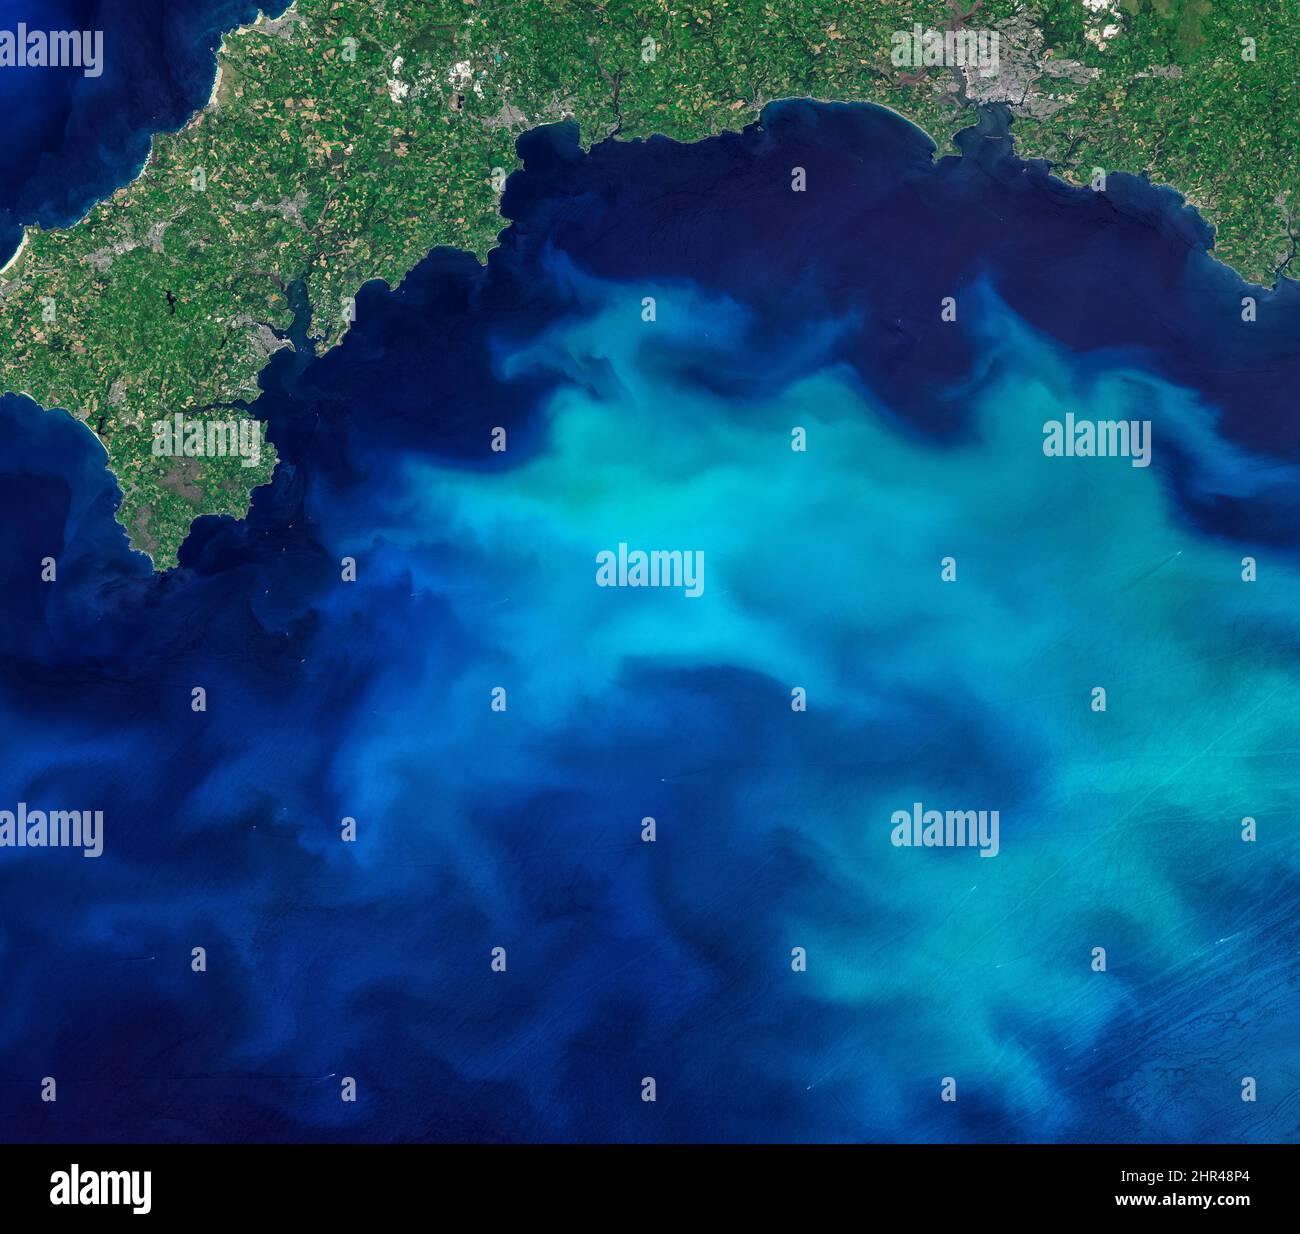 Blooms of phytoplankton in the sea around England, aerial top view photo of blue sea, turquoise ocean image. Elements of this image furnished by NASA. Stock Photo